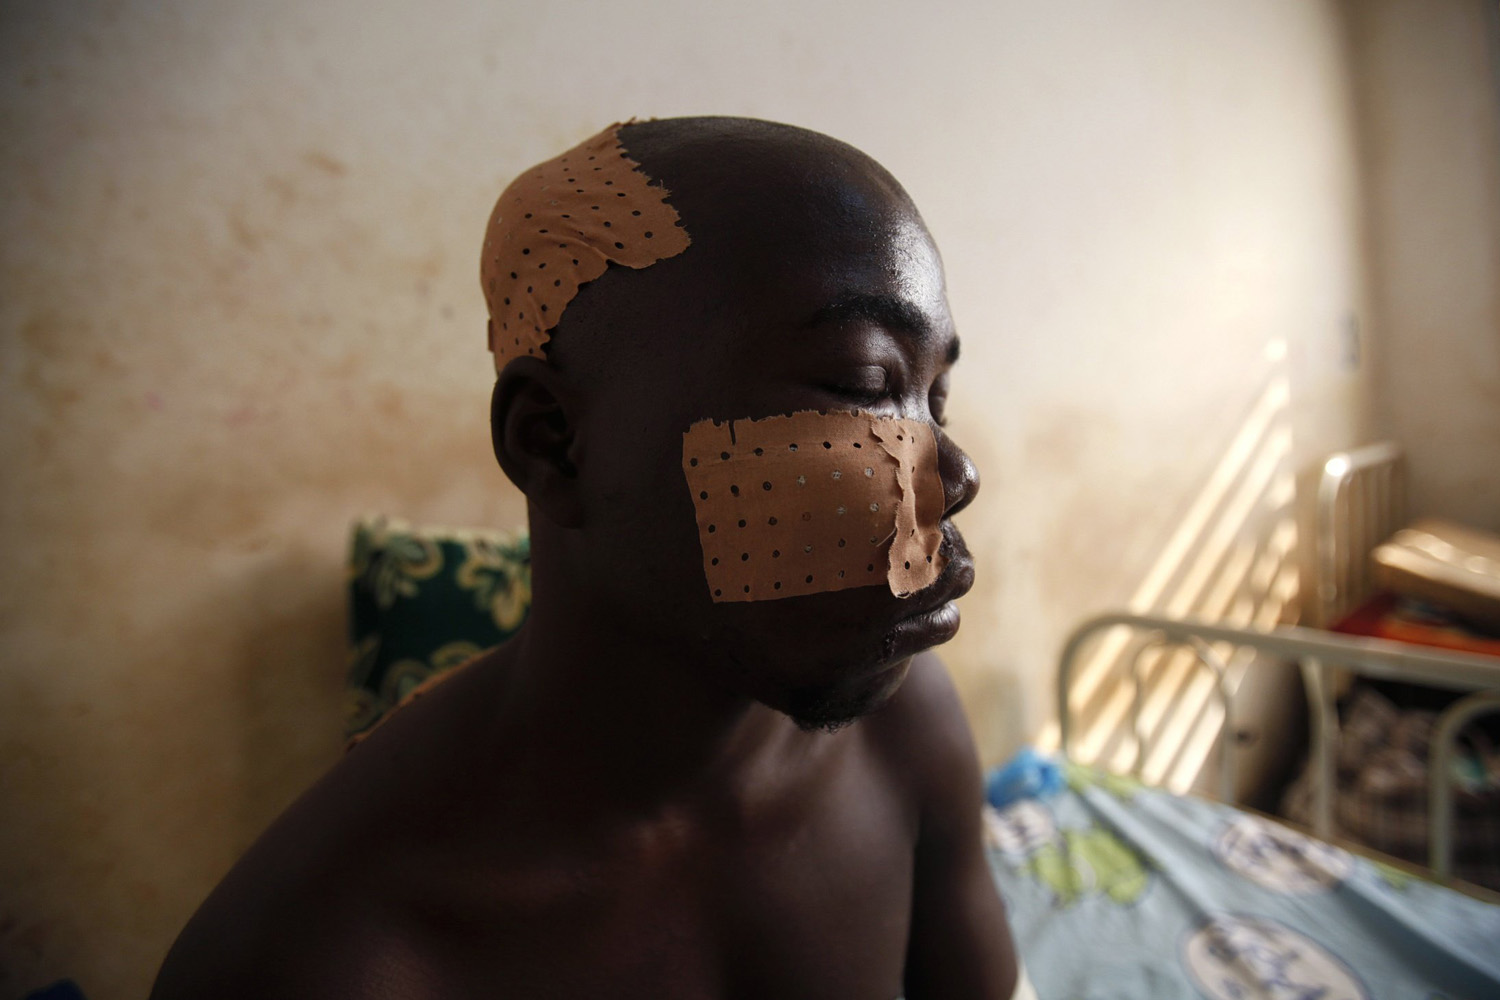 A civilian, wounded by the impact of a rocket, sits on his bed at "Hopital de l'Amitie" in Bangui